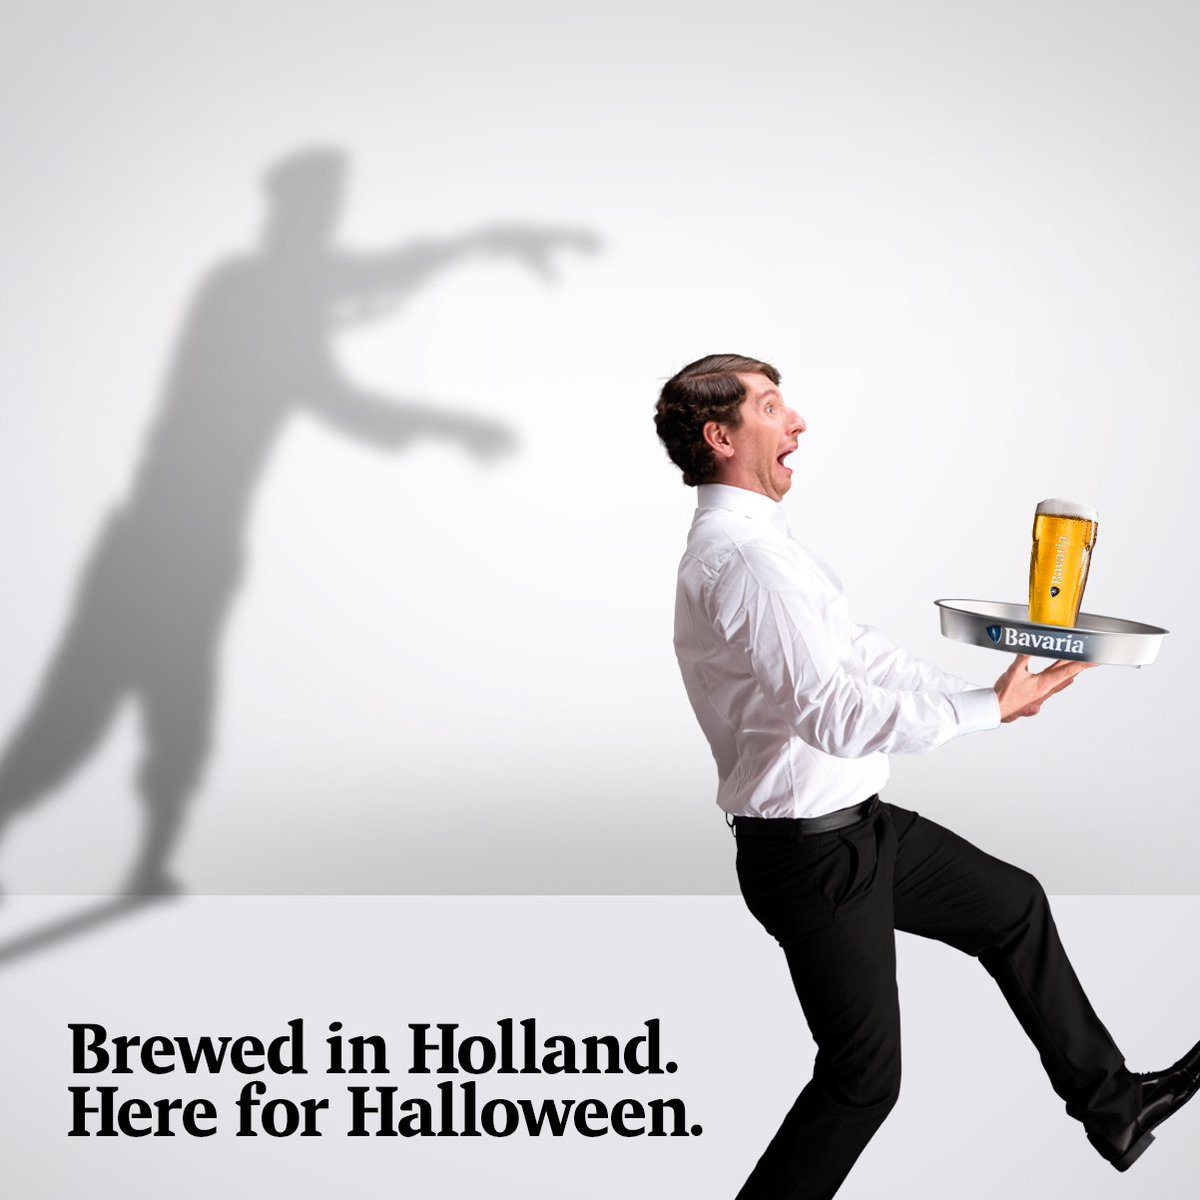 “Just the thing for a perishing thirst.” Bavaria. A shockingly independent beer. #BavariaBeer #Halloween